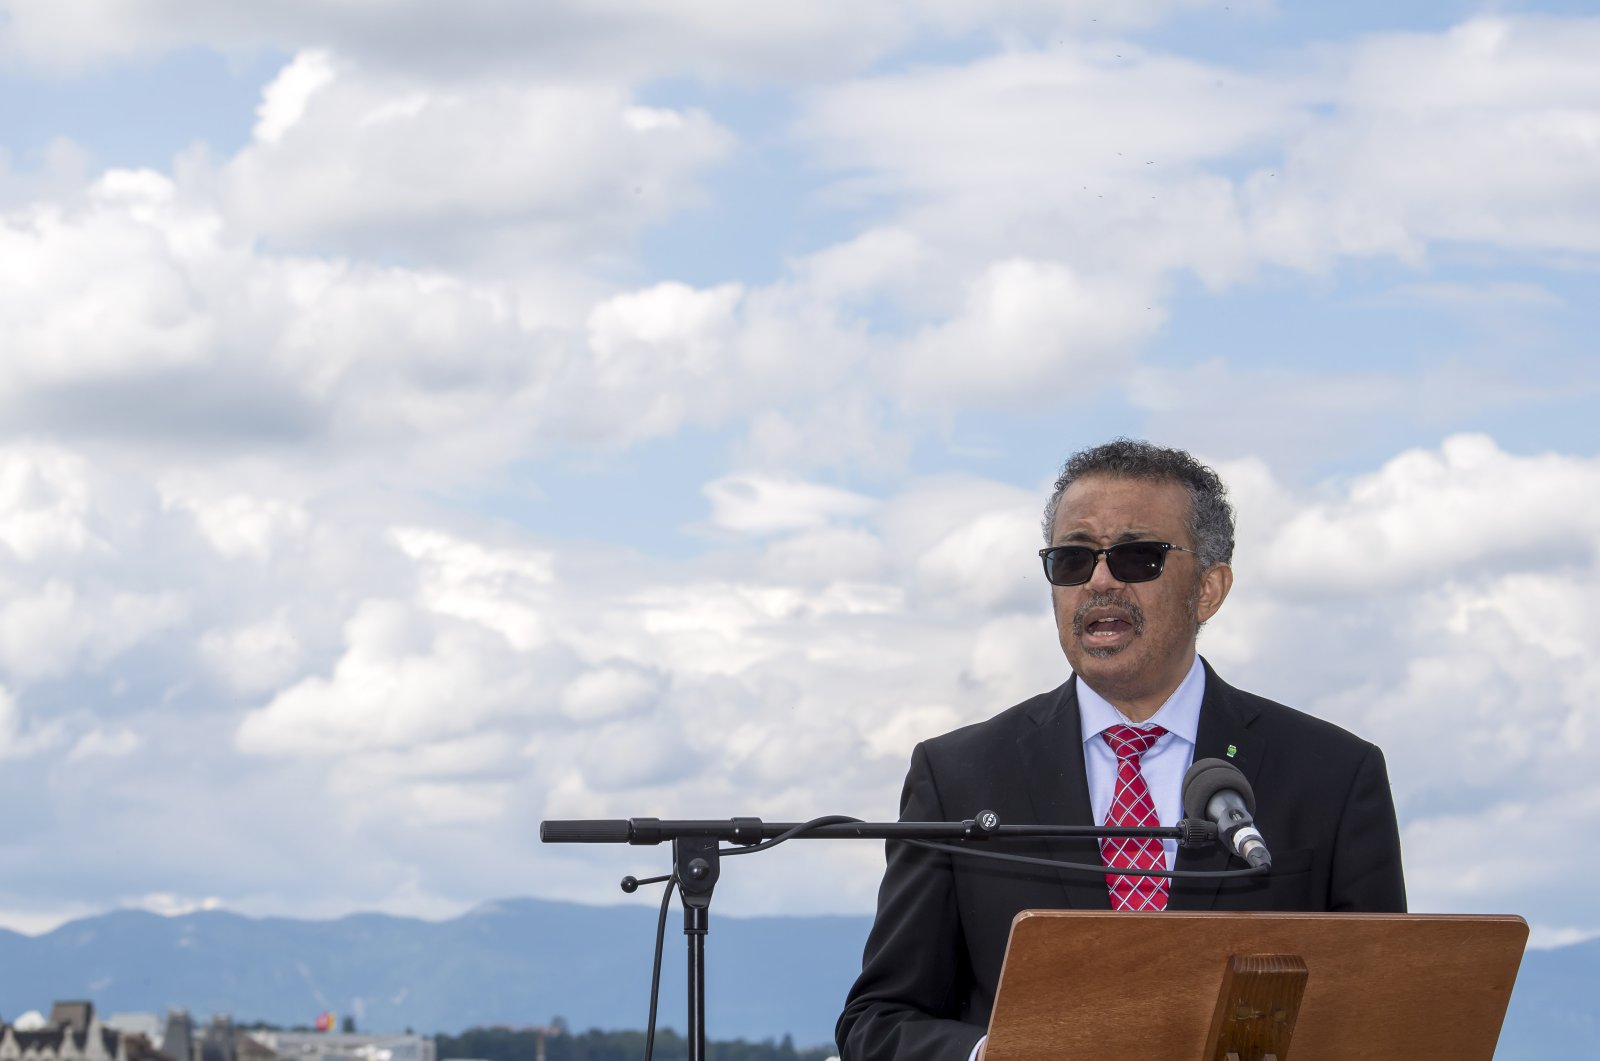 World Health Organization (WHO) Director-General, Tedros Adhanom Ghebreyesus, speaks during the relaunch ceremony of the famous fountain 'Le Jet d'Eau', which was postponed due to the coronavirus outbreak, in Geneva, Switzerland, June 11, 2020. (AP Photo)